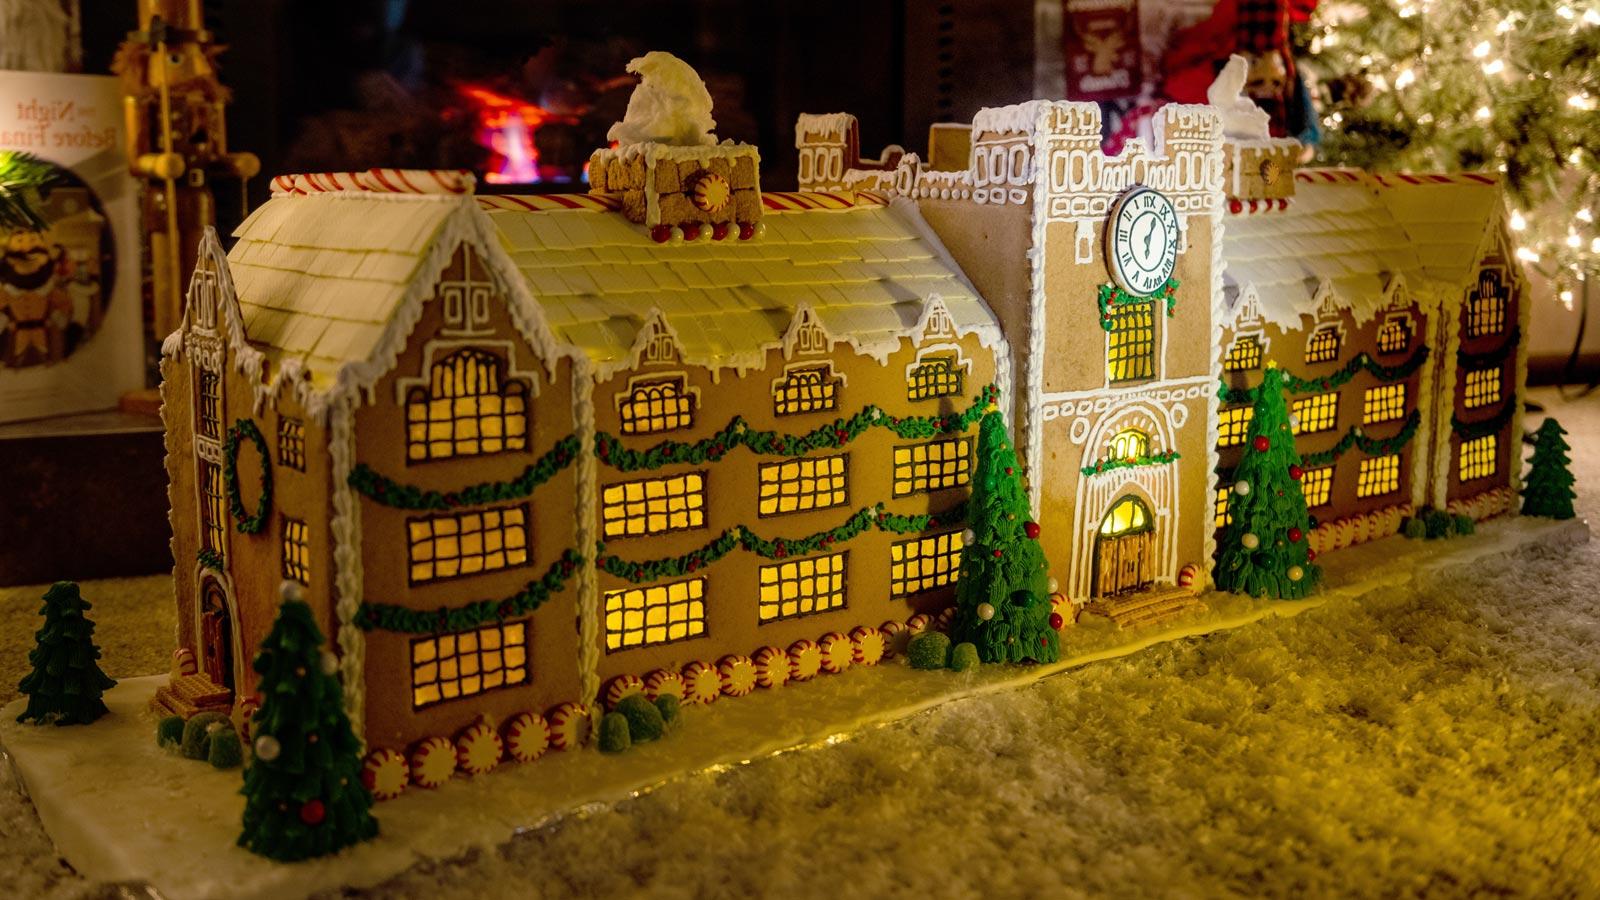 The Administration Building made out of gingerbread, frosting and other sweet treats.